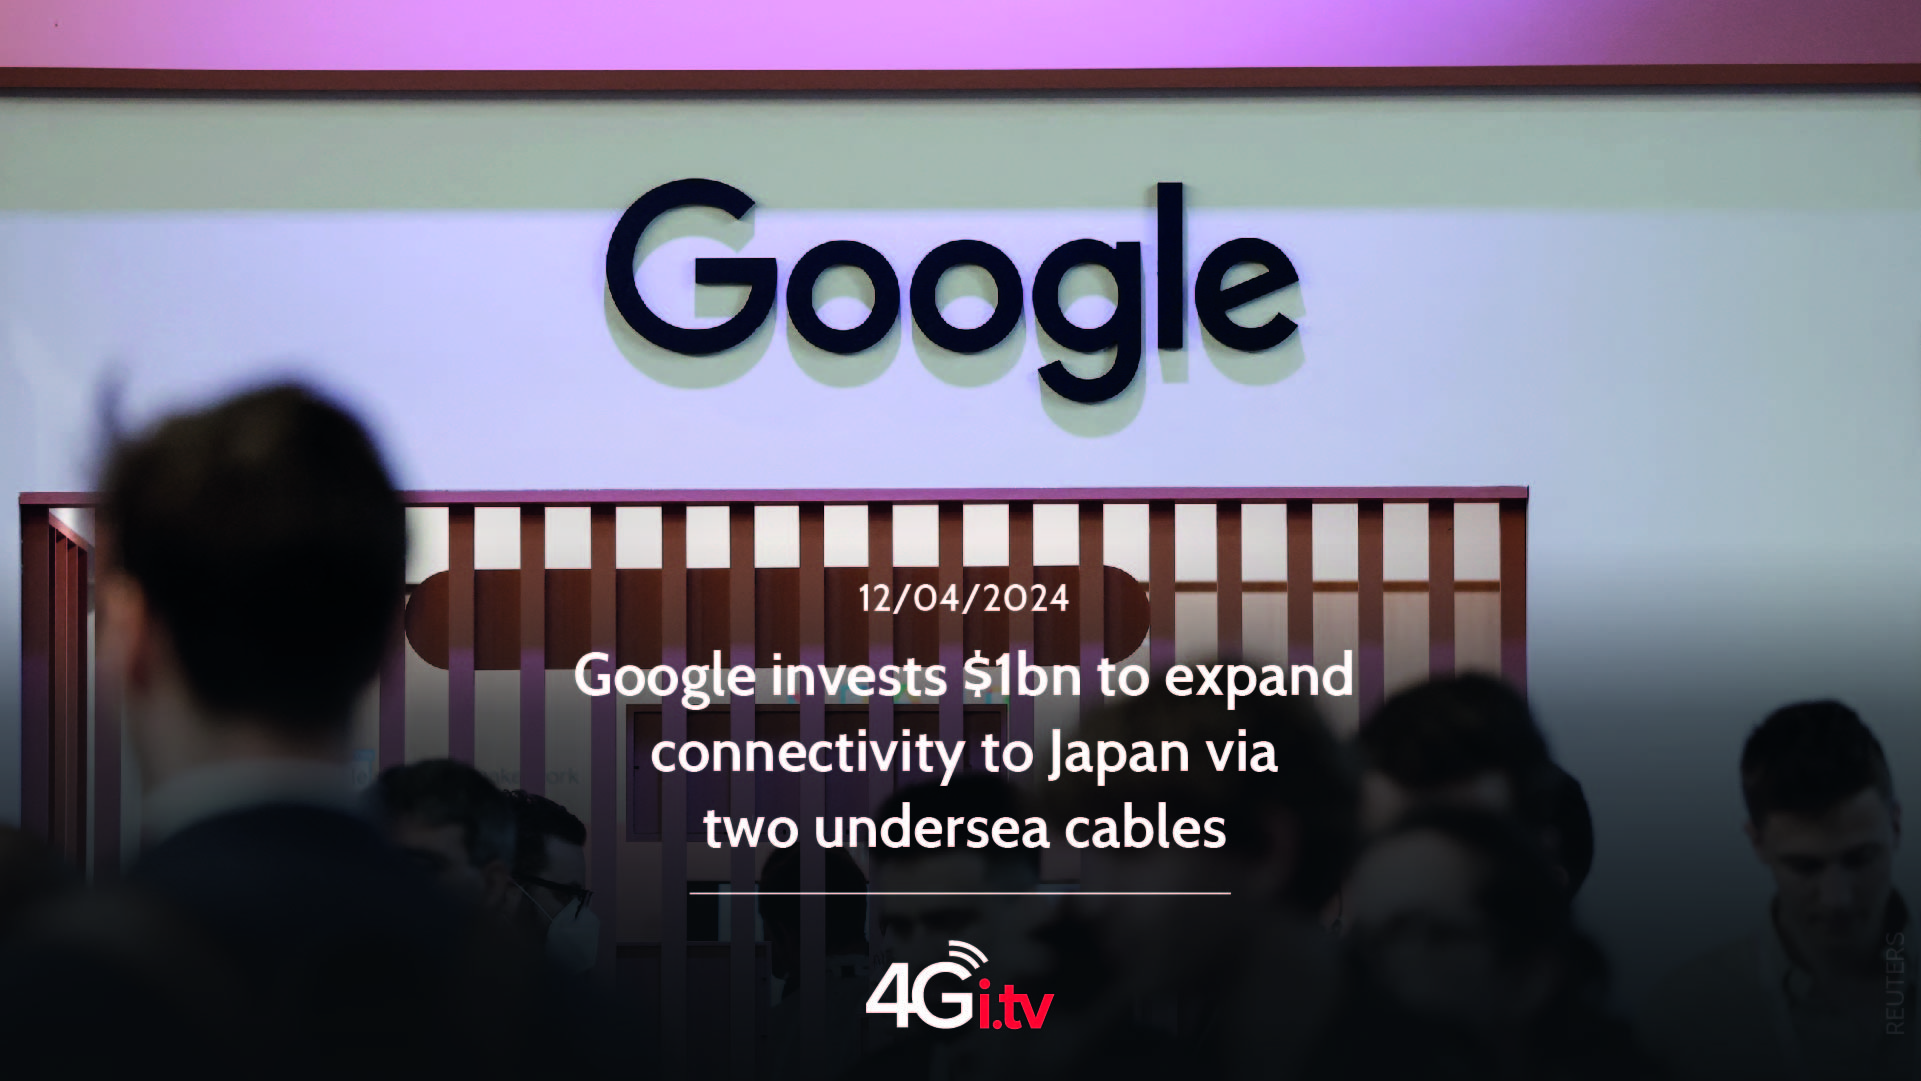 Подробнее о статье Google invests $1bn to expand connectivity to Japan via two undersea cables